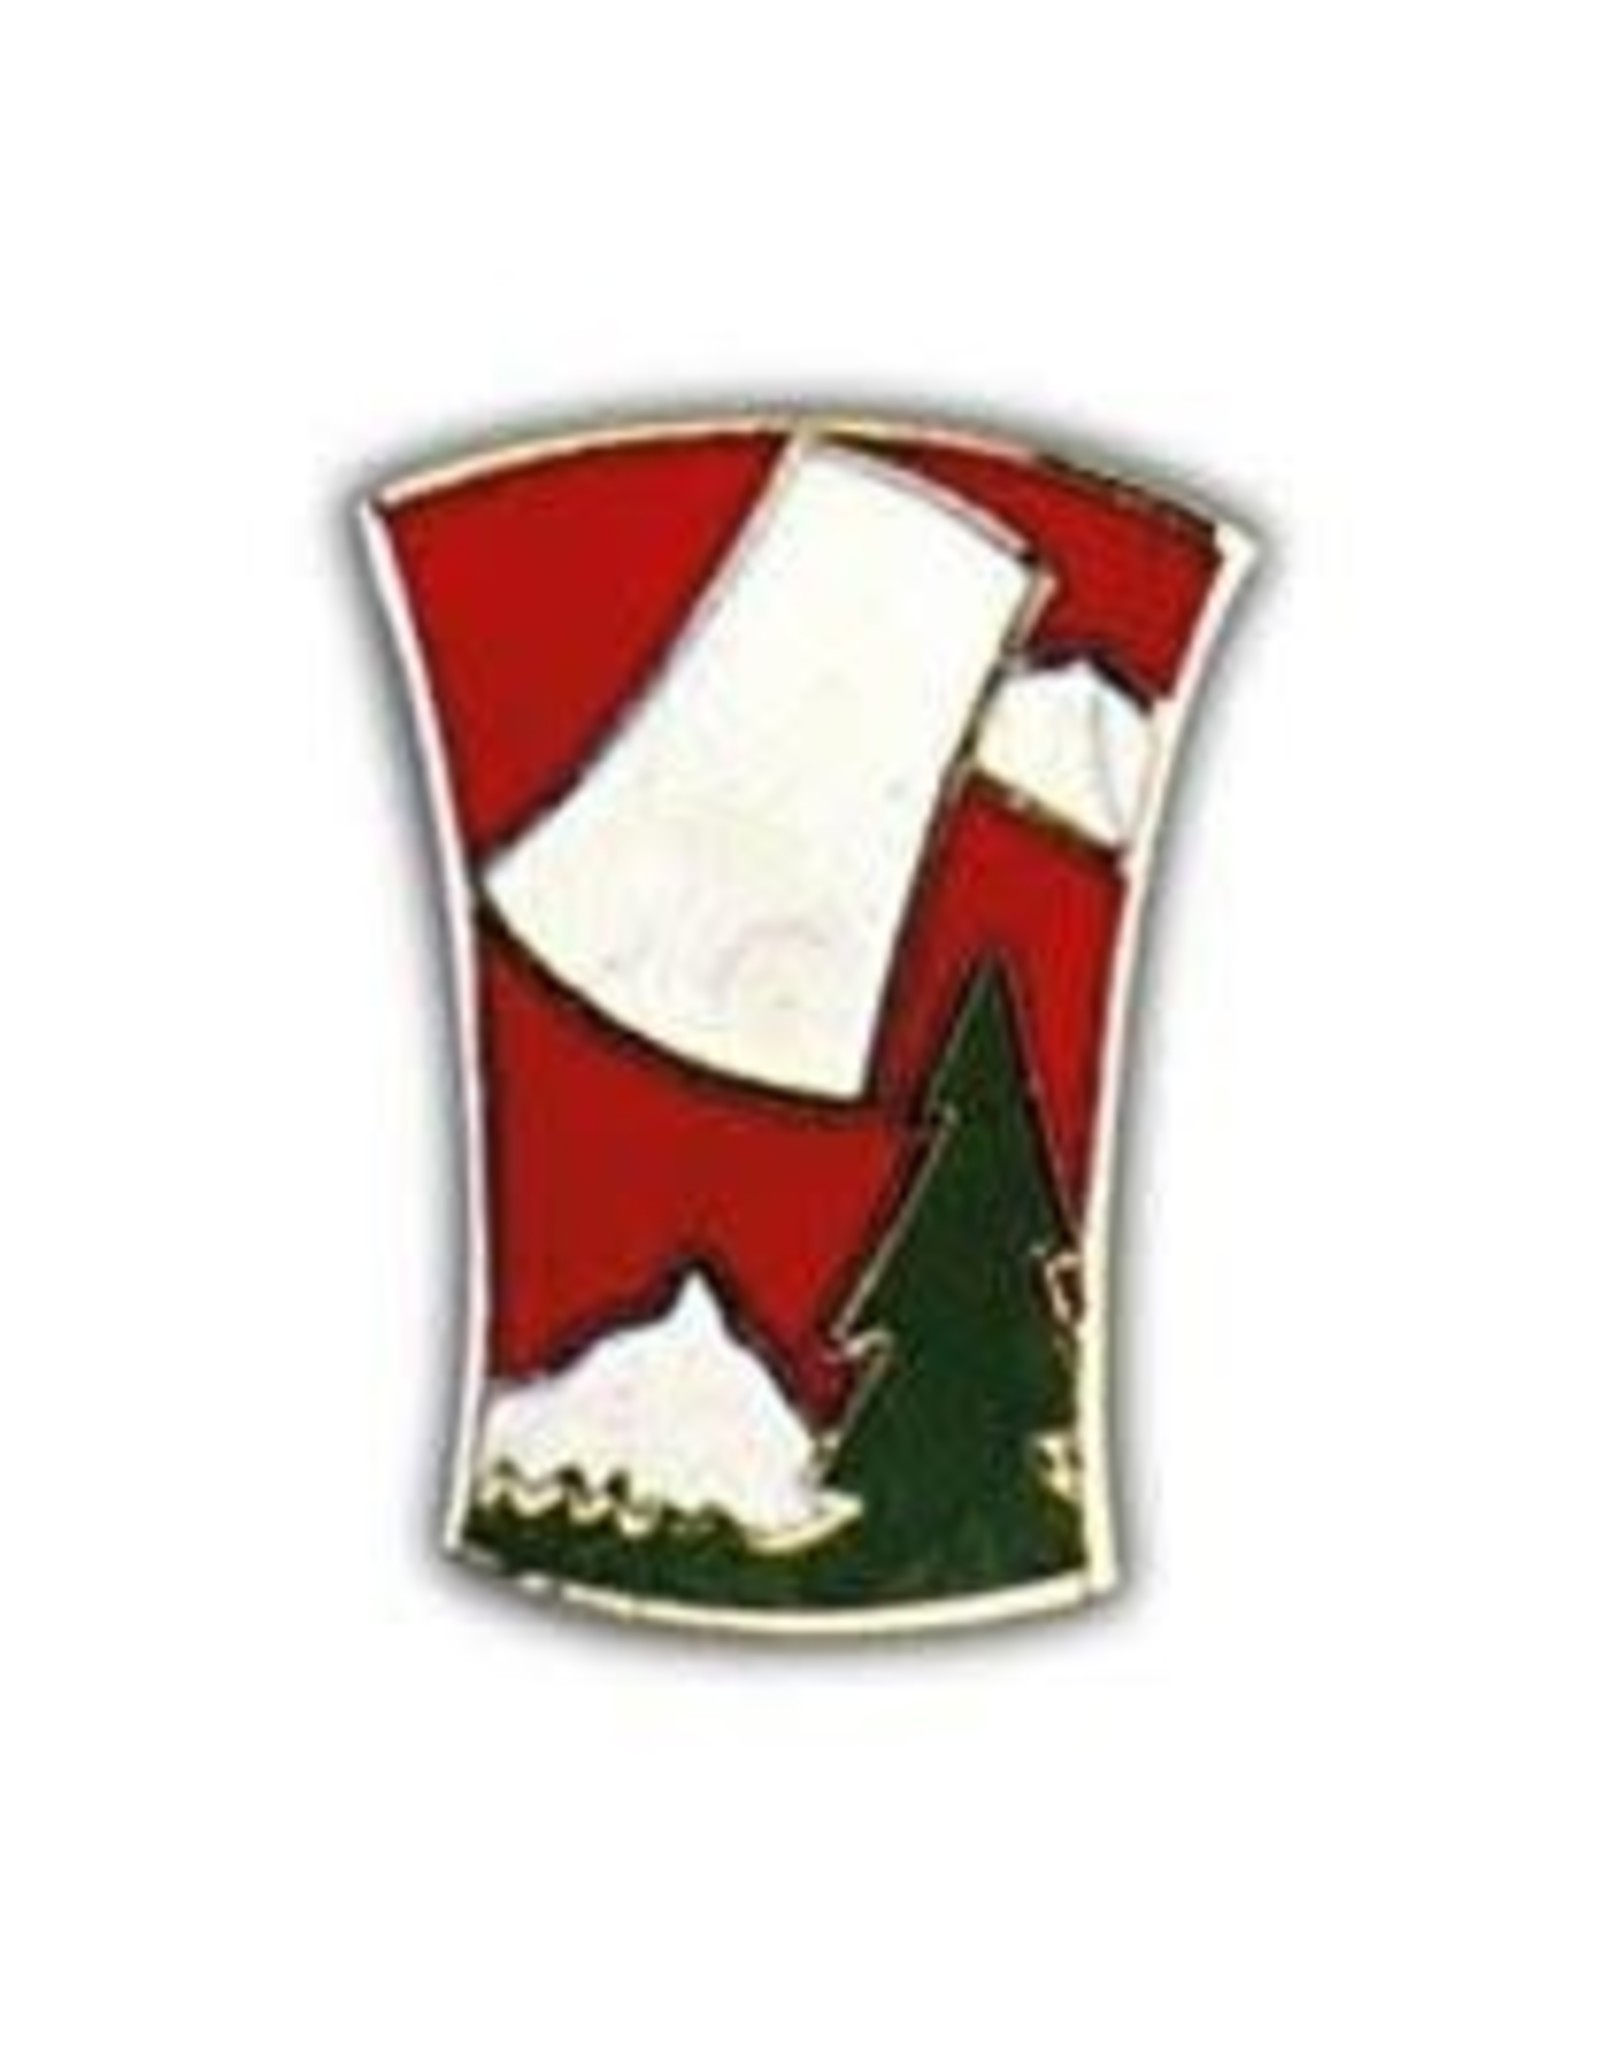 Pin - Army 070th Inf Div